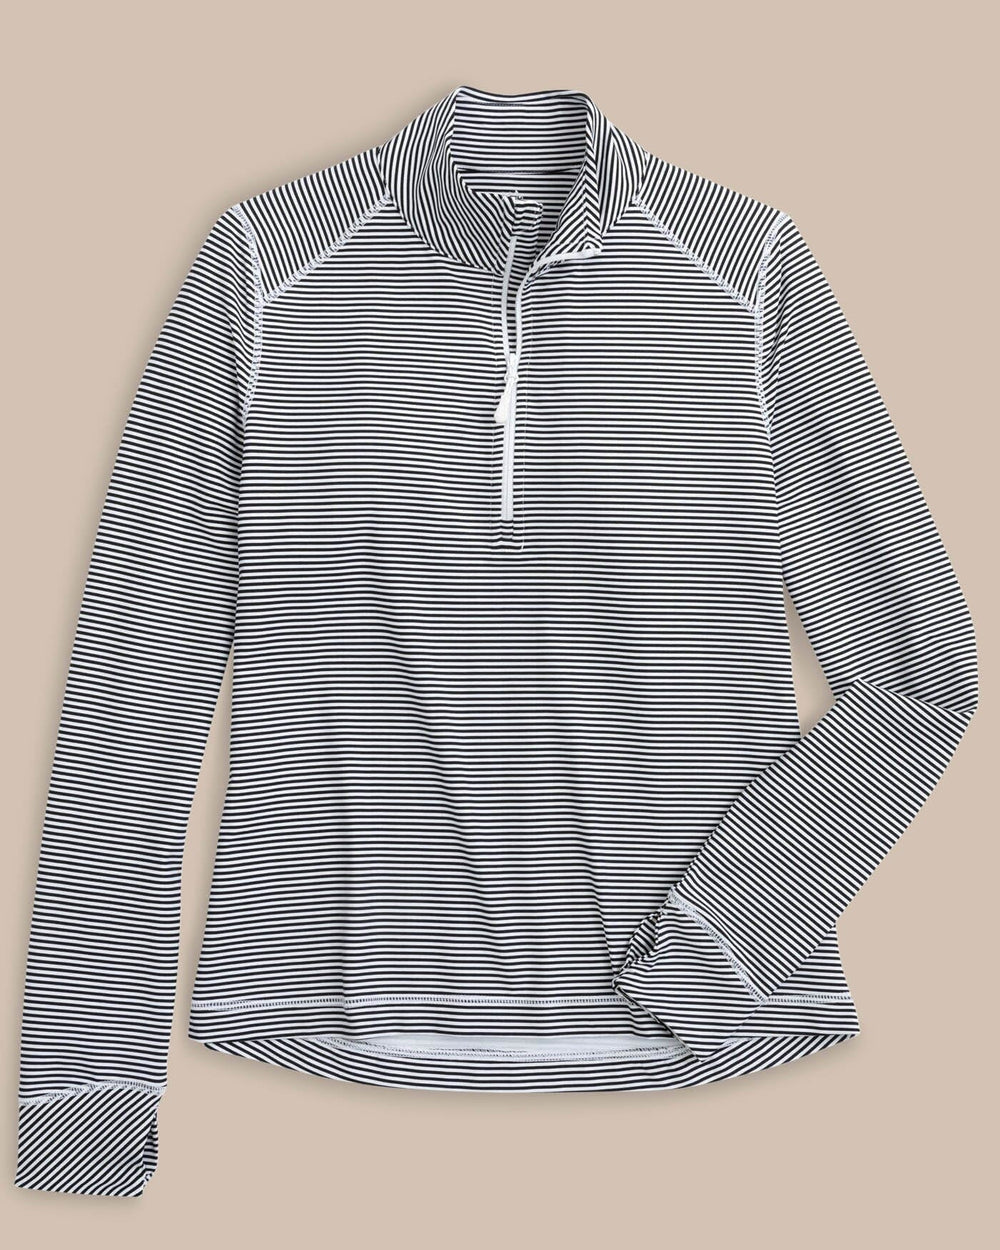 The front view of the Southern Tide Team Colors Runaround Quarter Zip Pull Over by Southern Tide - Black